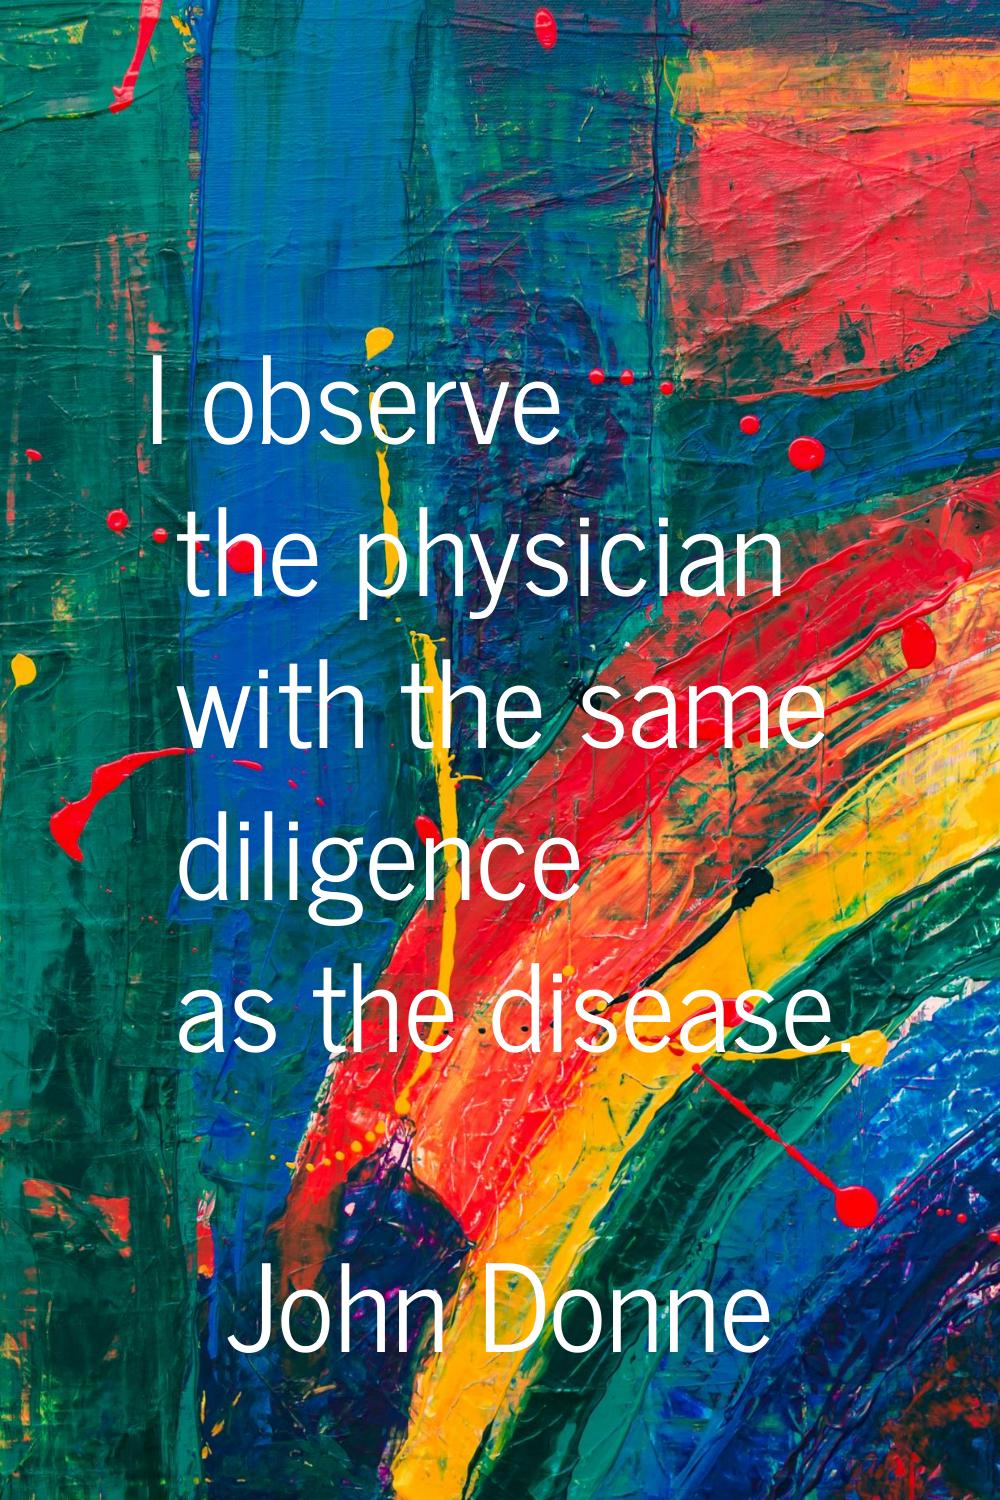 I observe the physician with the same diligence as the disease.